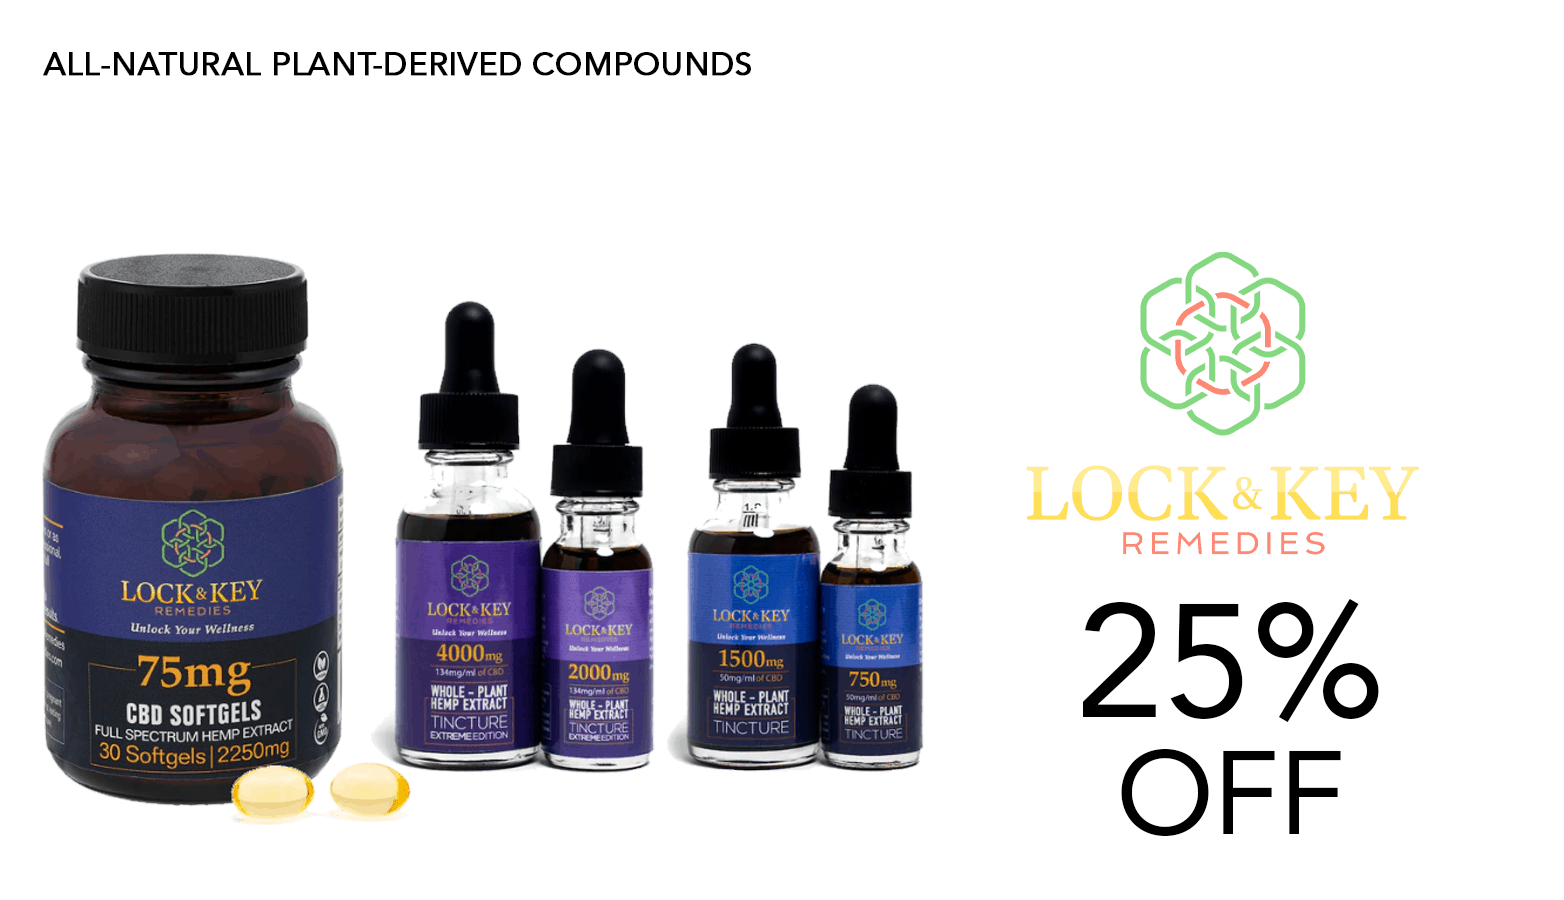 LocK and Key Remedies Inc CBD Coupon Code 25 Percent Offer Website